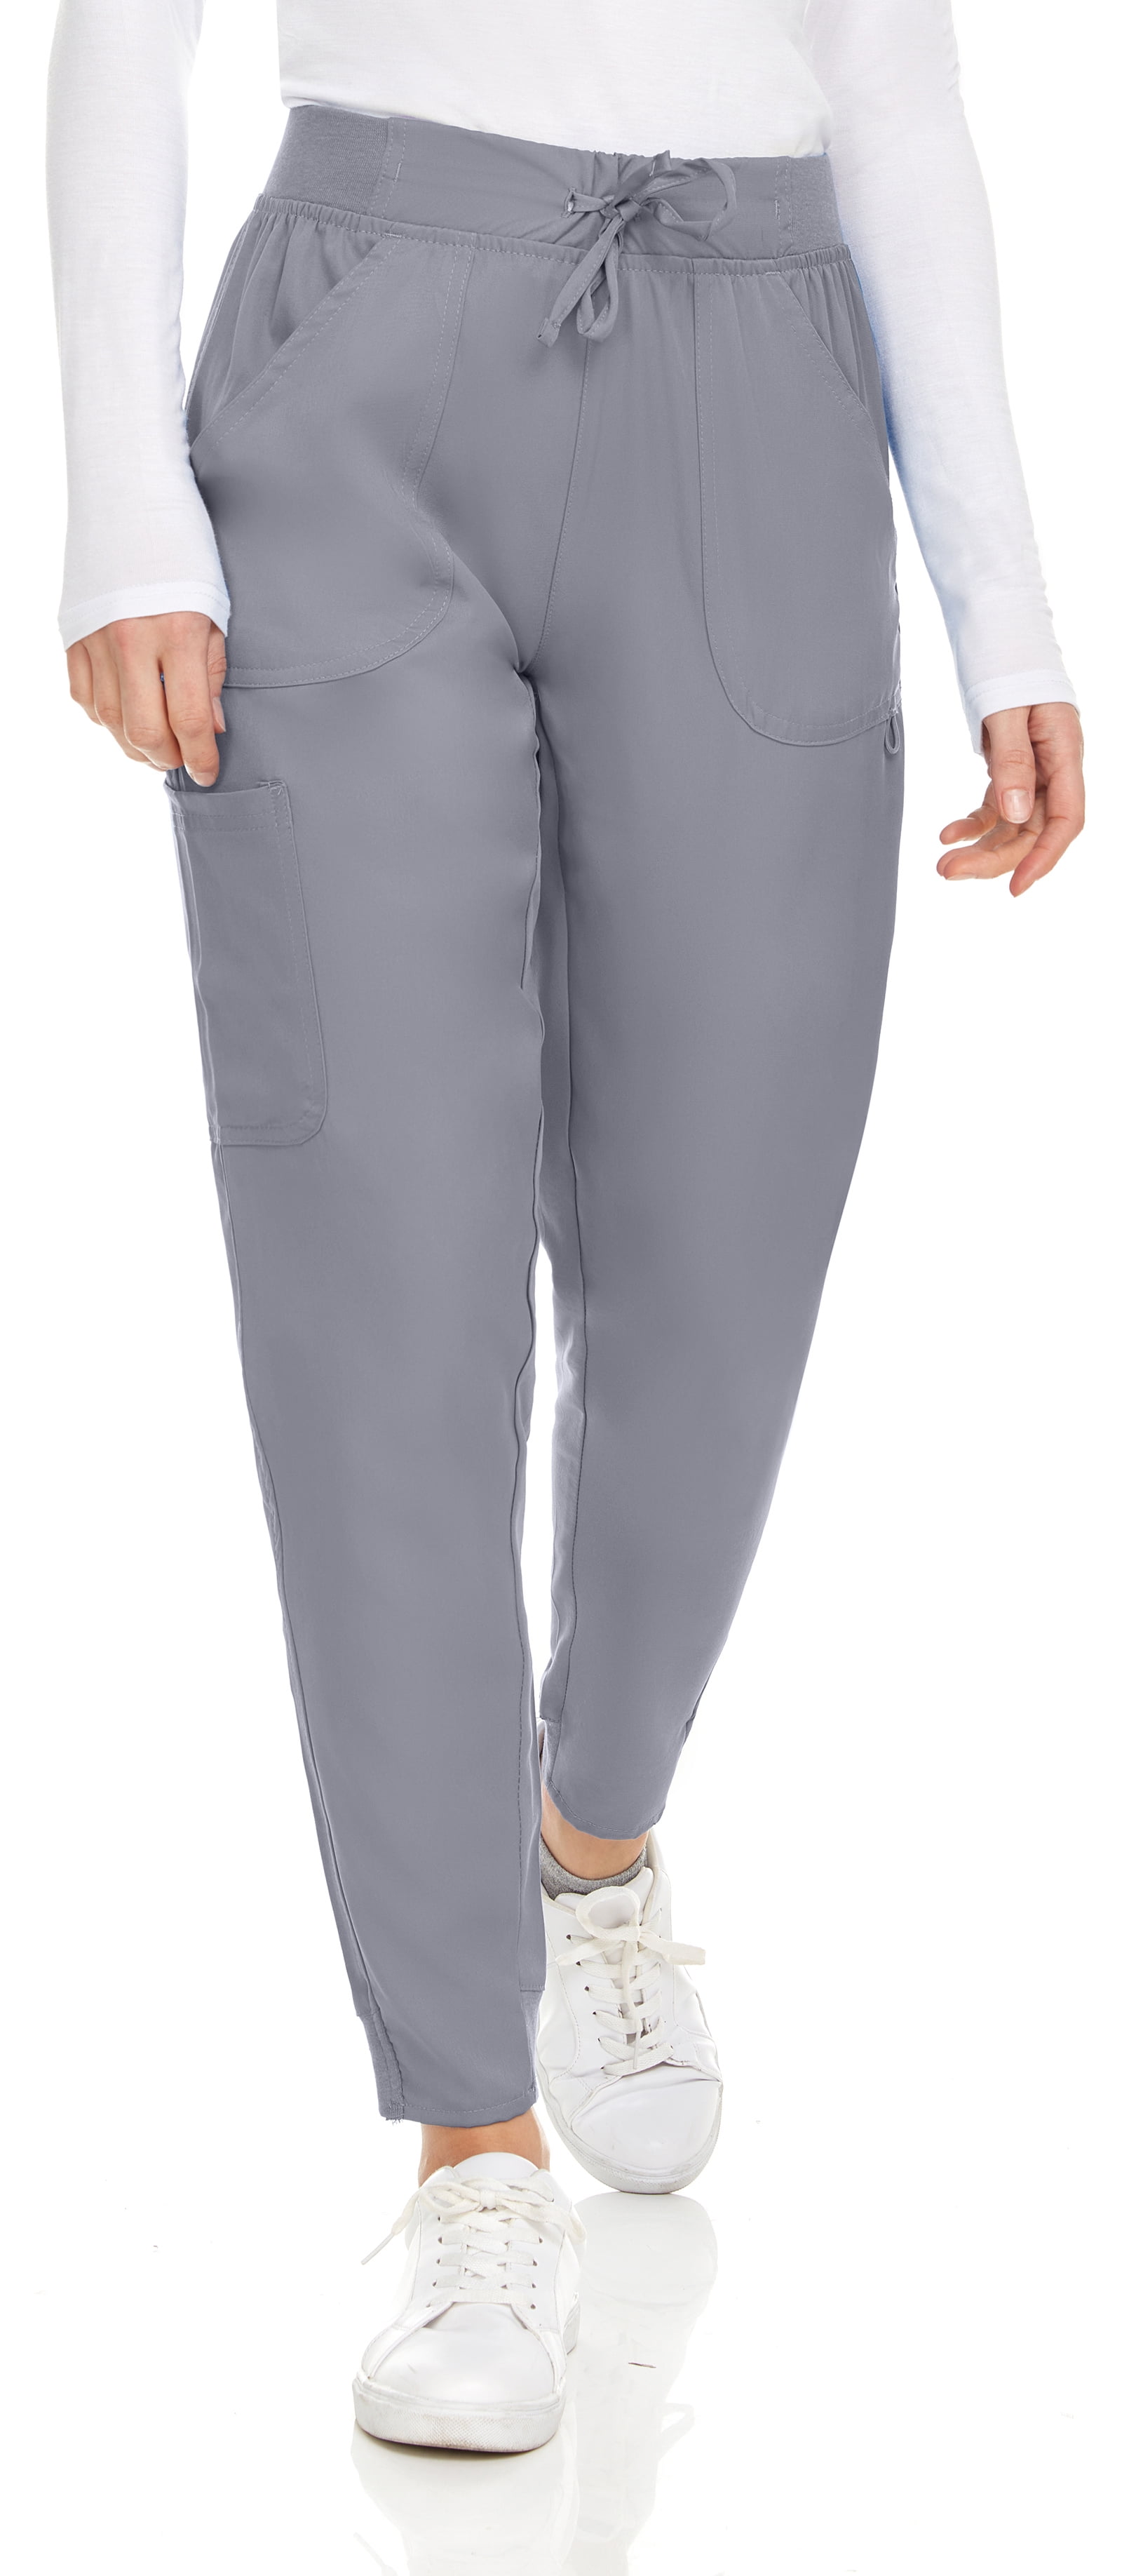 Avalanche Women's Lightweight Full Length Super Soft Joggers With Pockets 